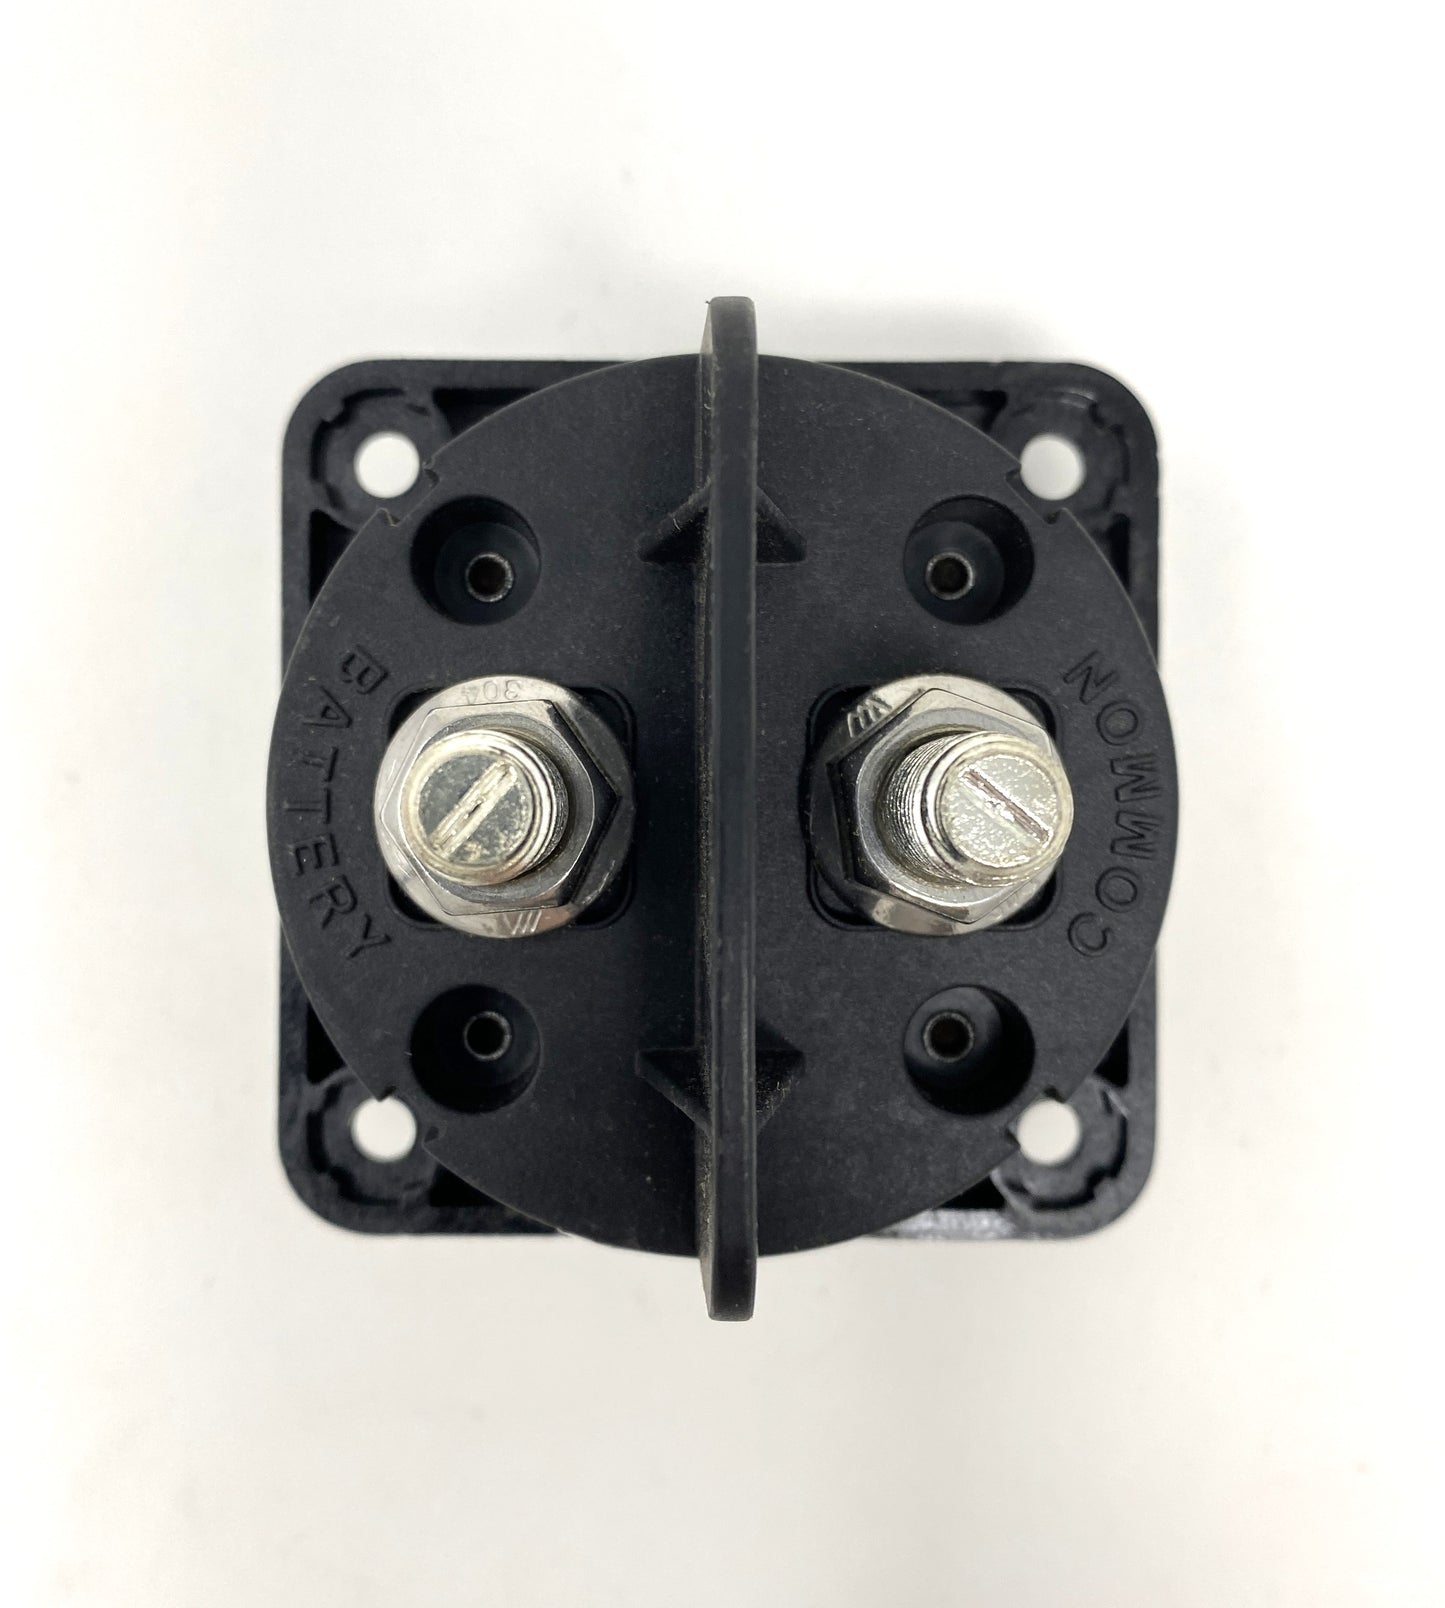 5073012 SWIR29008 - Switch, BLACK Actuator Rotary Switch, LittleFuse, Panel Mount